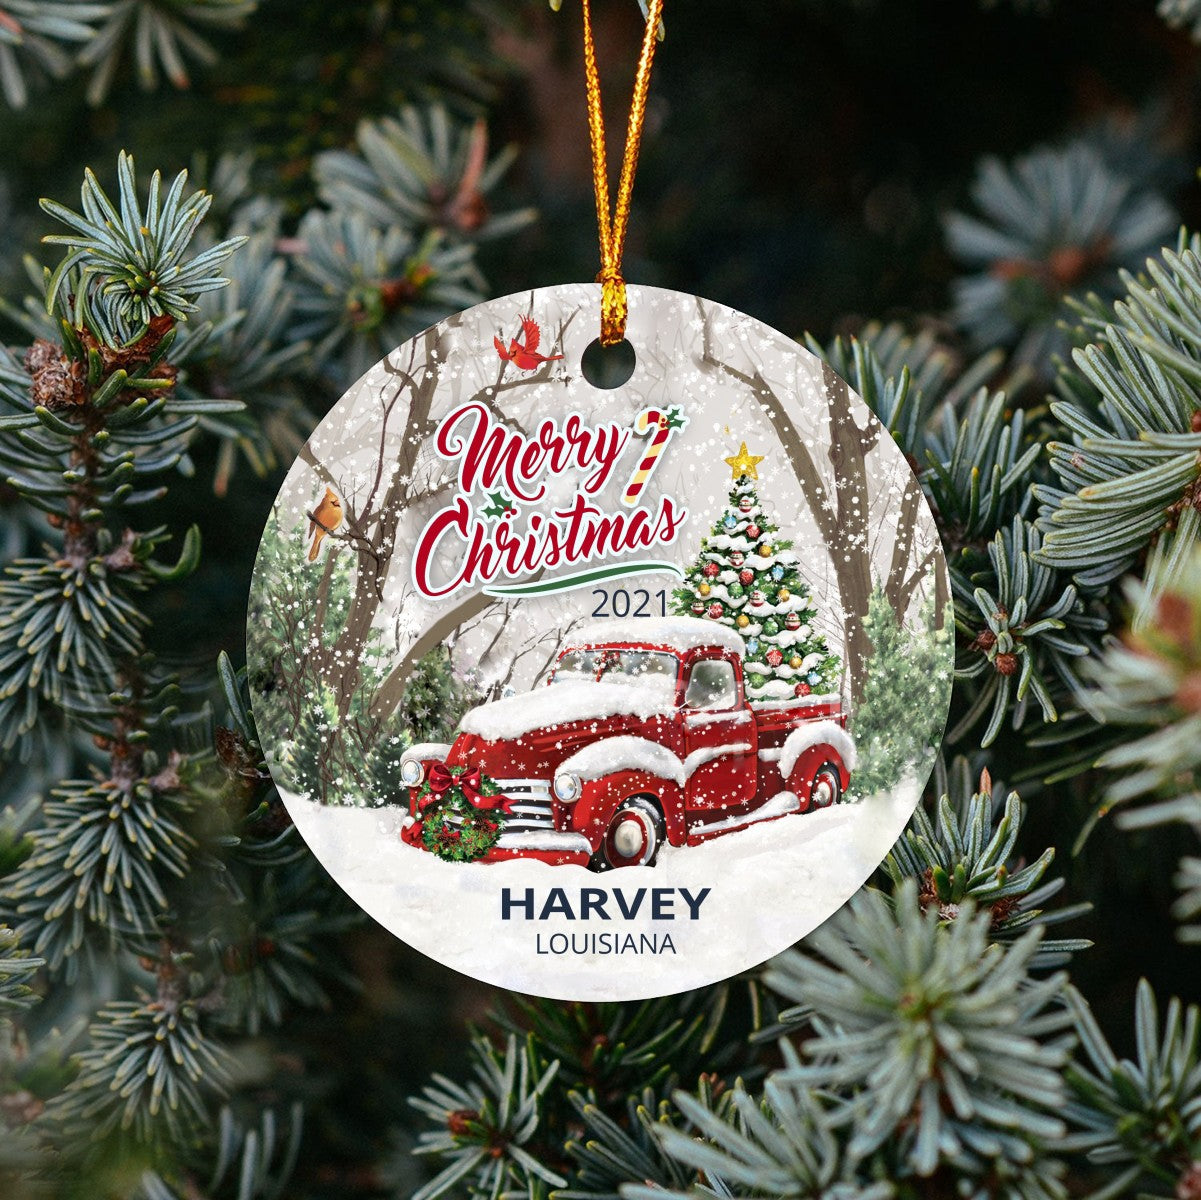 Christmas Tree Ornaments Harvey - Ornament With Name City, State Harvey Louisiana LA Ornament - Red Truck Xmas Ornaments 3'' Plastic Gift For Family, Friend And Housewarming